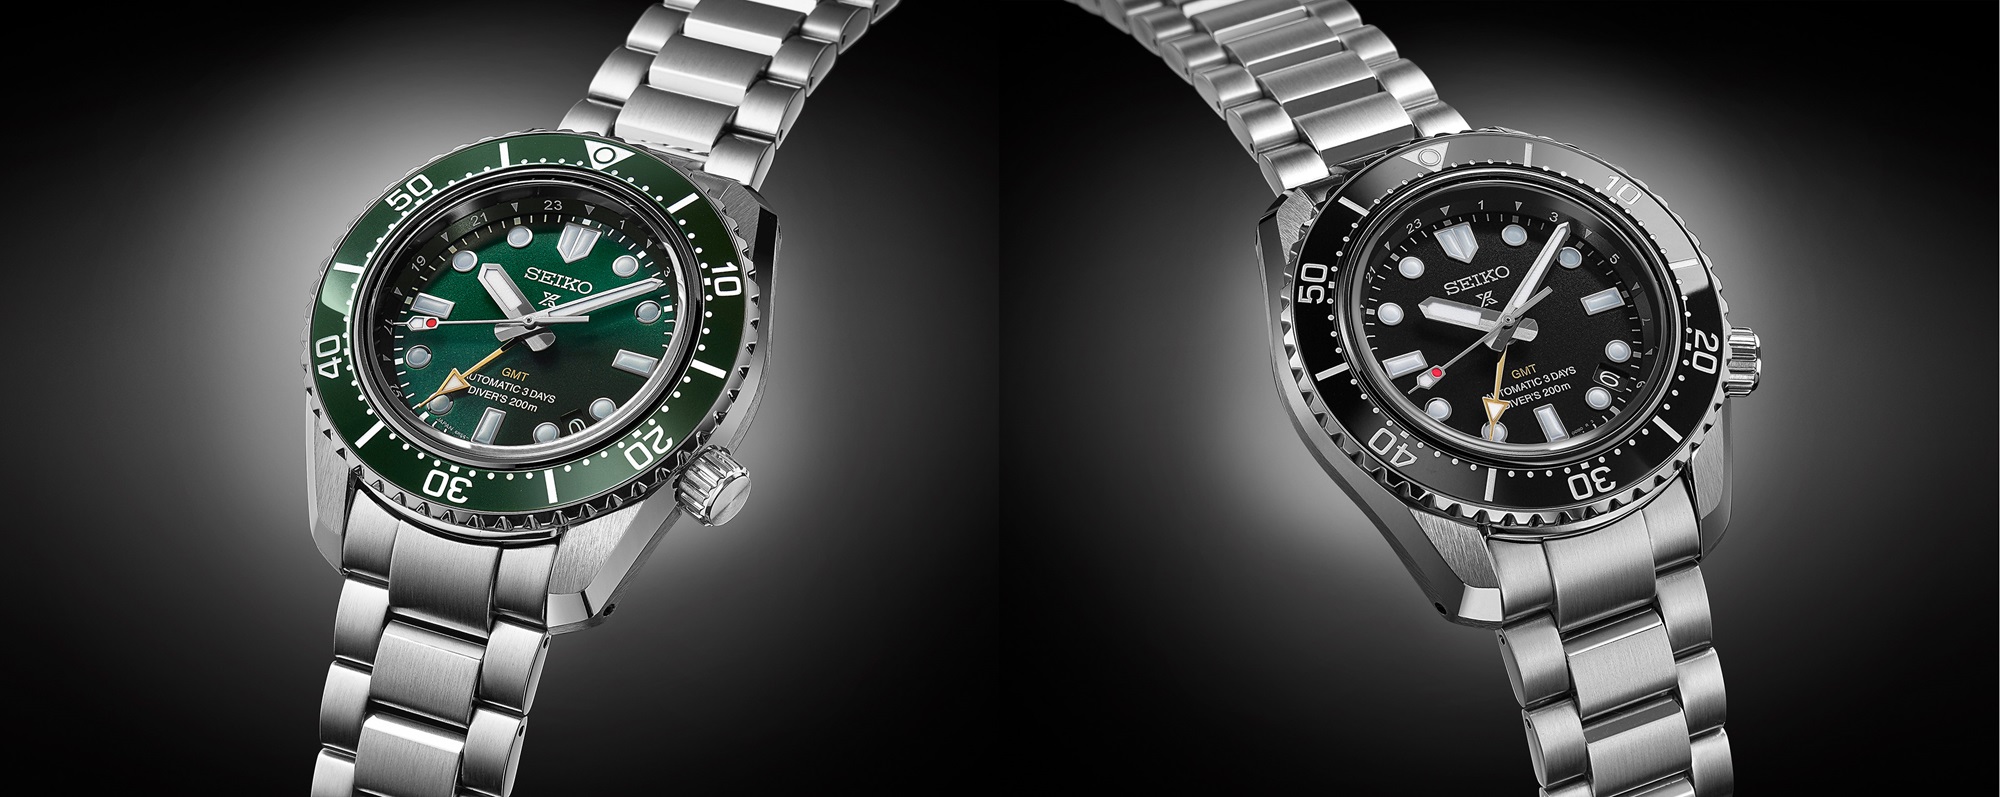 Powered by a new movement, a mechanical GMT diver's watch the Seiko Prospex collection for the first time. | Seiko Watch